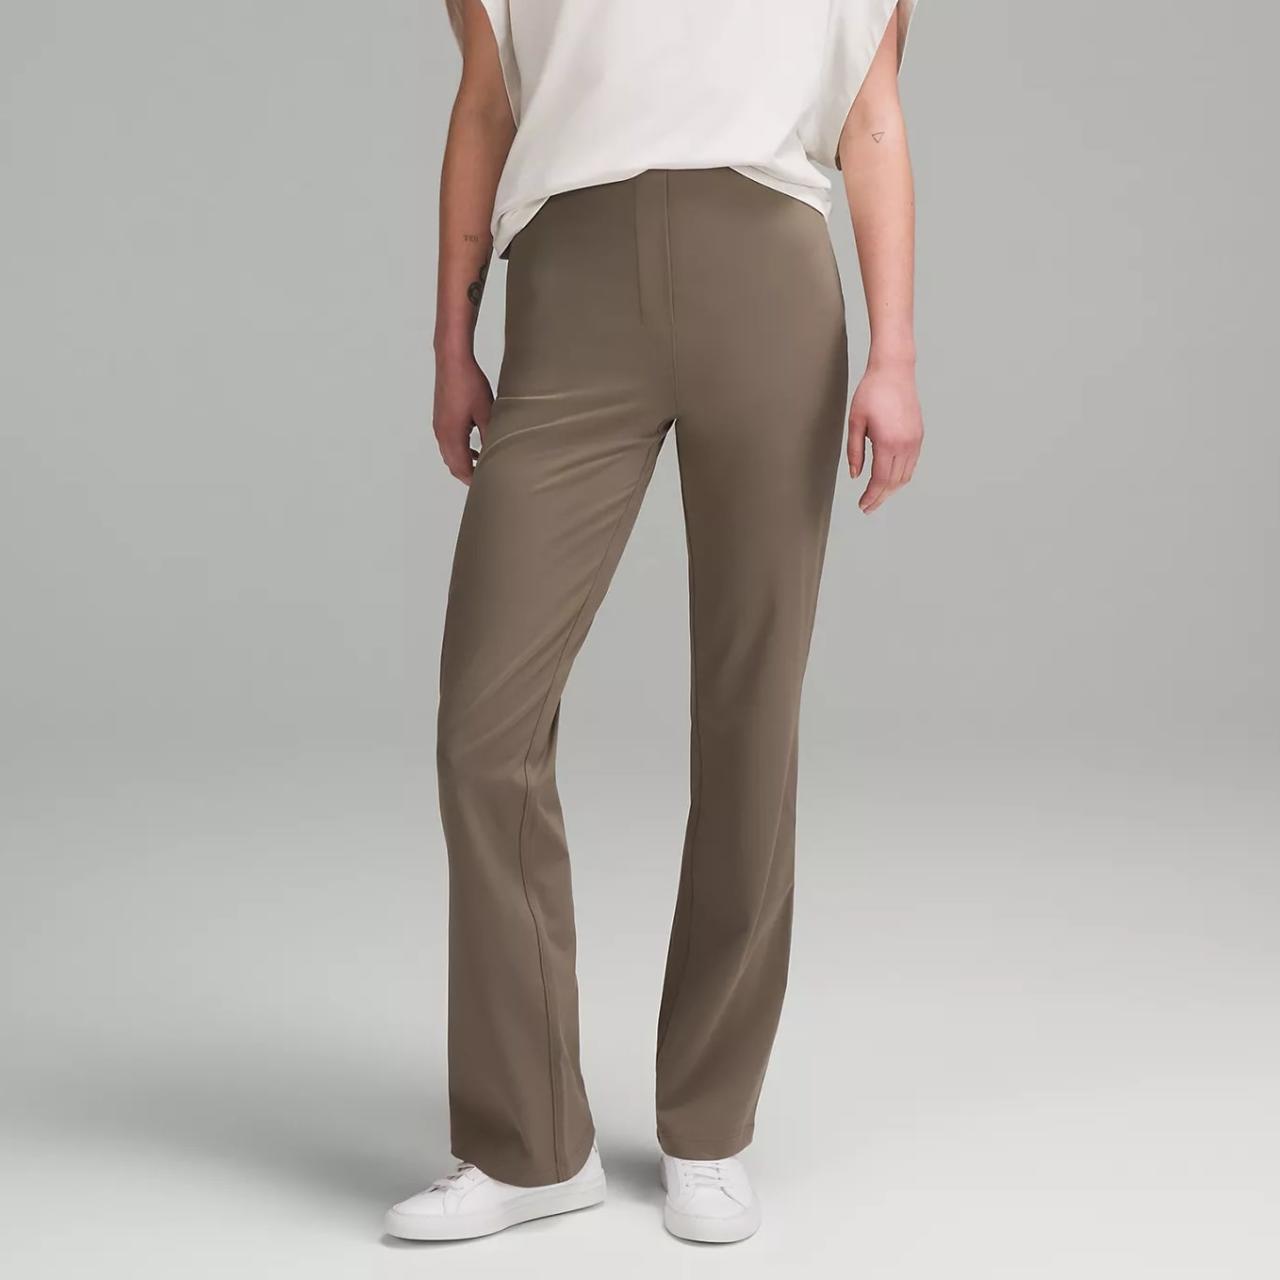 Lululemon shoppers swear that these viral $158 trousers are the 'perfect  work pants